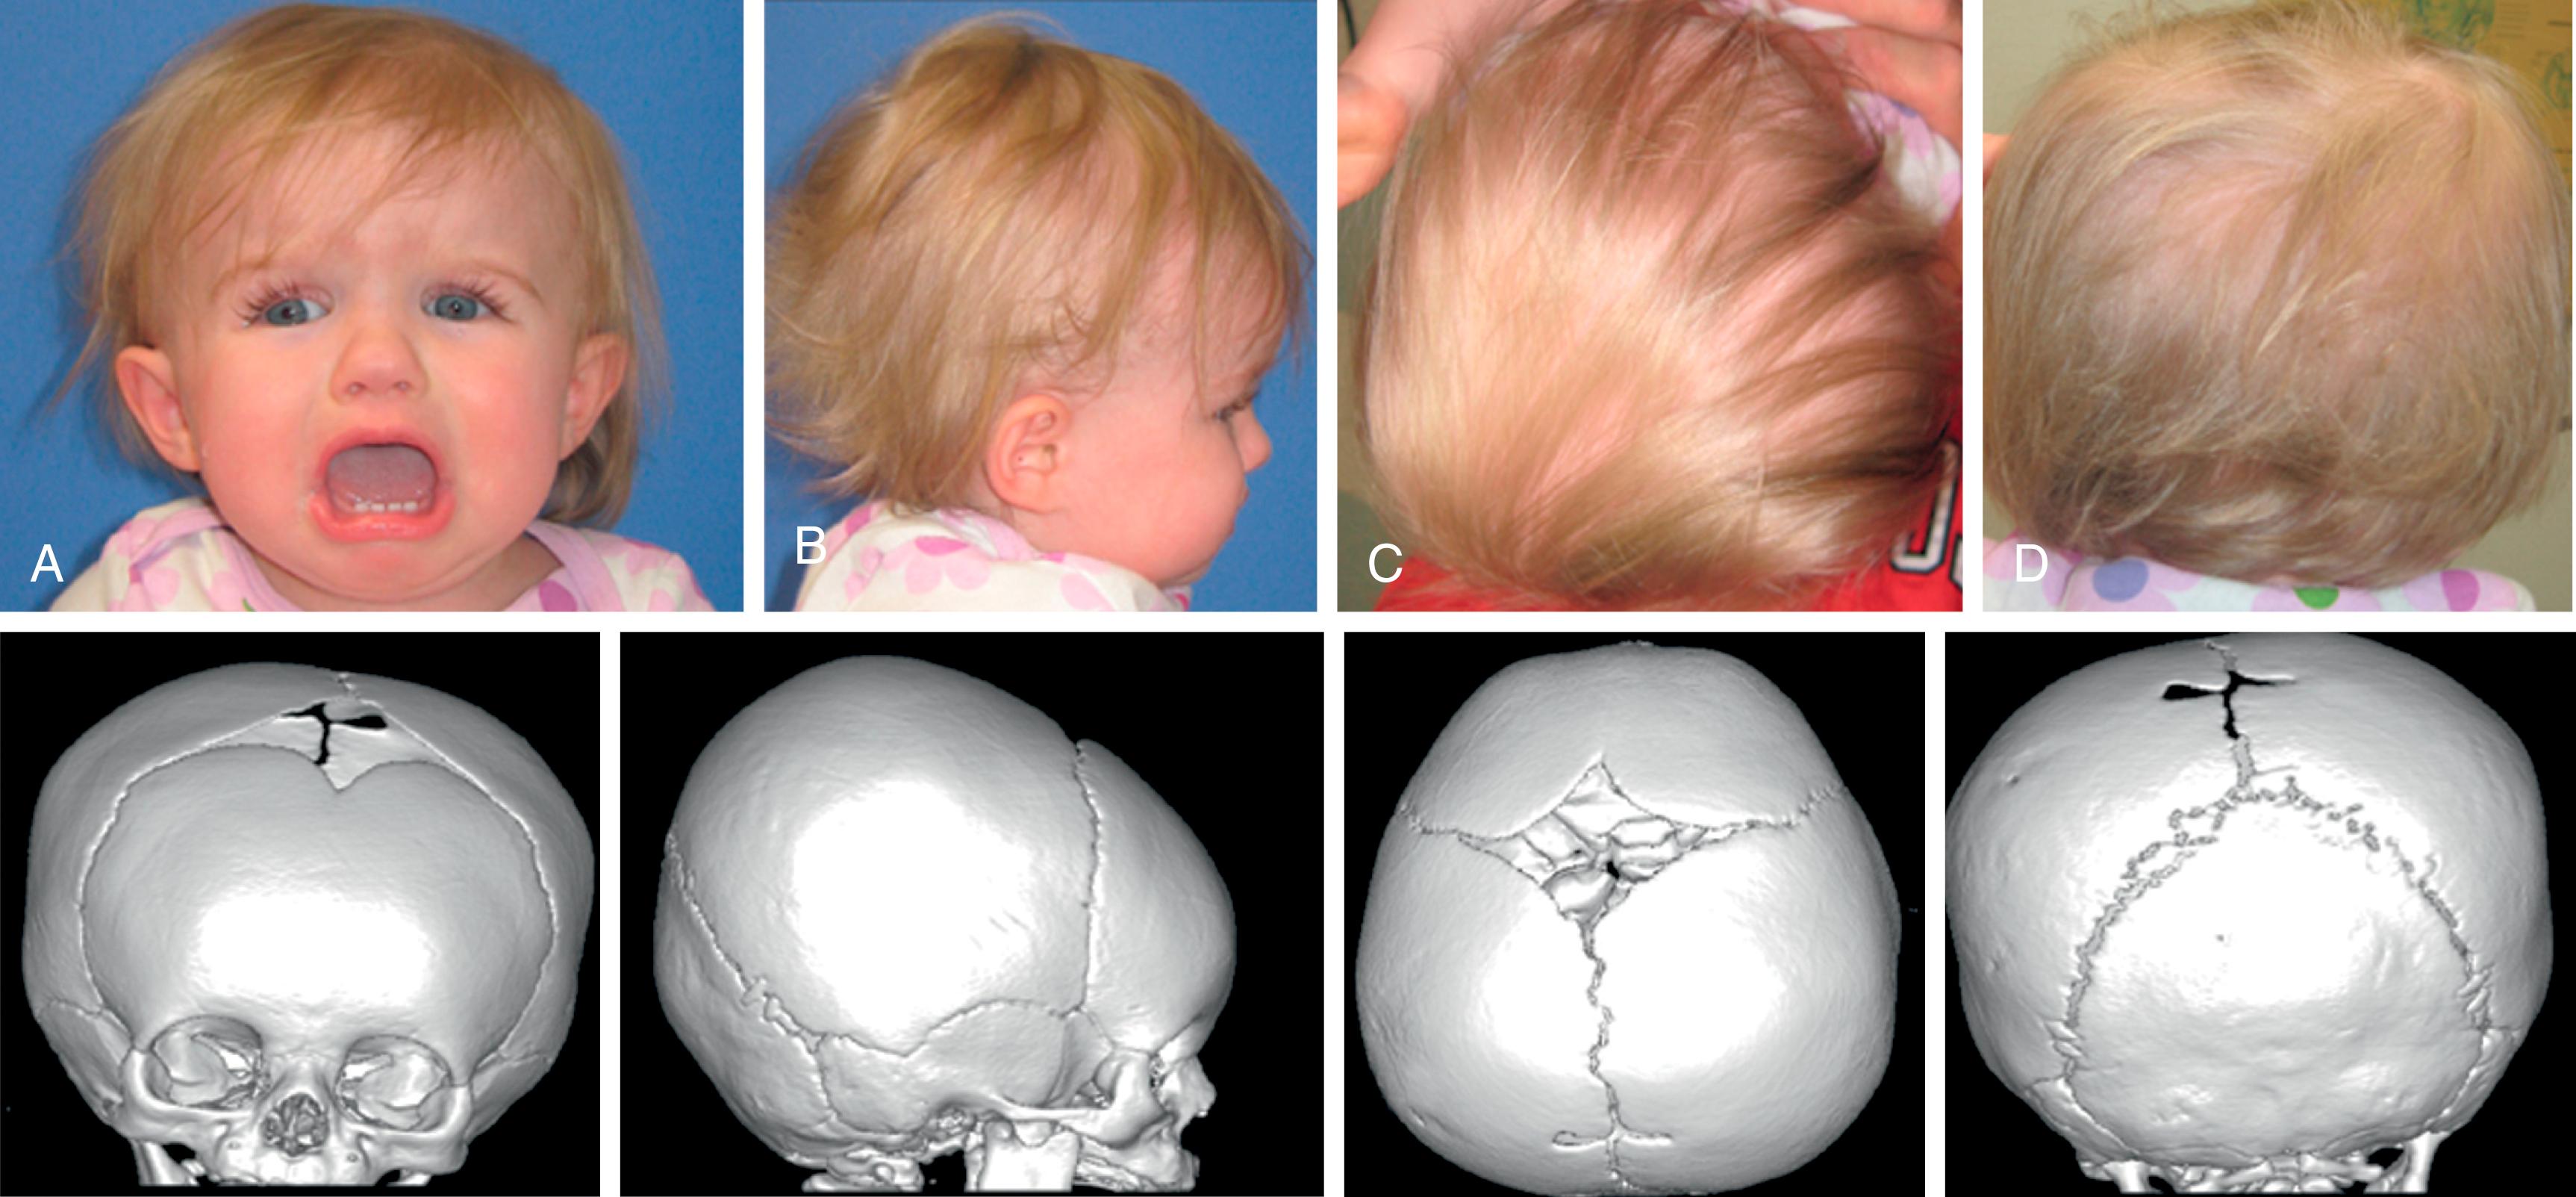 Fig. 6.8, Twelve-month-old girl with positional/nonsynostotic brachycephaly. (A) Frontal clinical and three-dimensional computed tomography (3DCT) images showing a round head and face. (B) Right lateral clinical and 3DCT images showing short head in anteroposterior length (brachycephalic) and mild tower head (turricephaly) in which the posterior skull is higher than the anterior skull. (C) Vertex clinical and 3DCT images show brachycephaly without synostosis. (D) Occipital clinical and 3DCT images show flattened occiput bilaterally without synostosis.